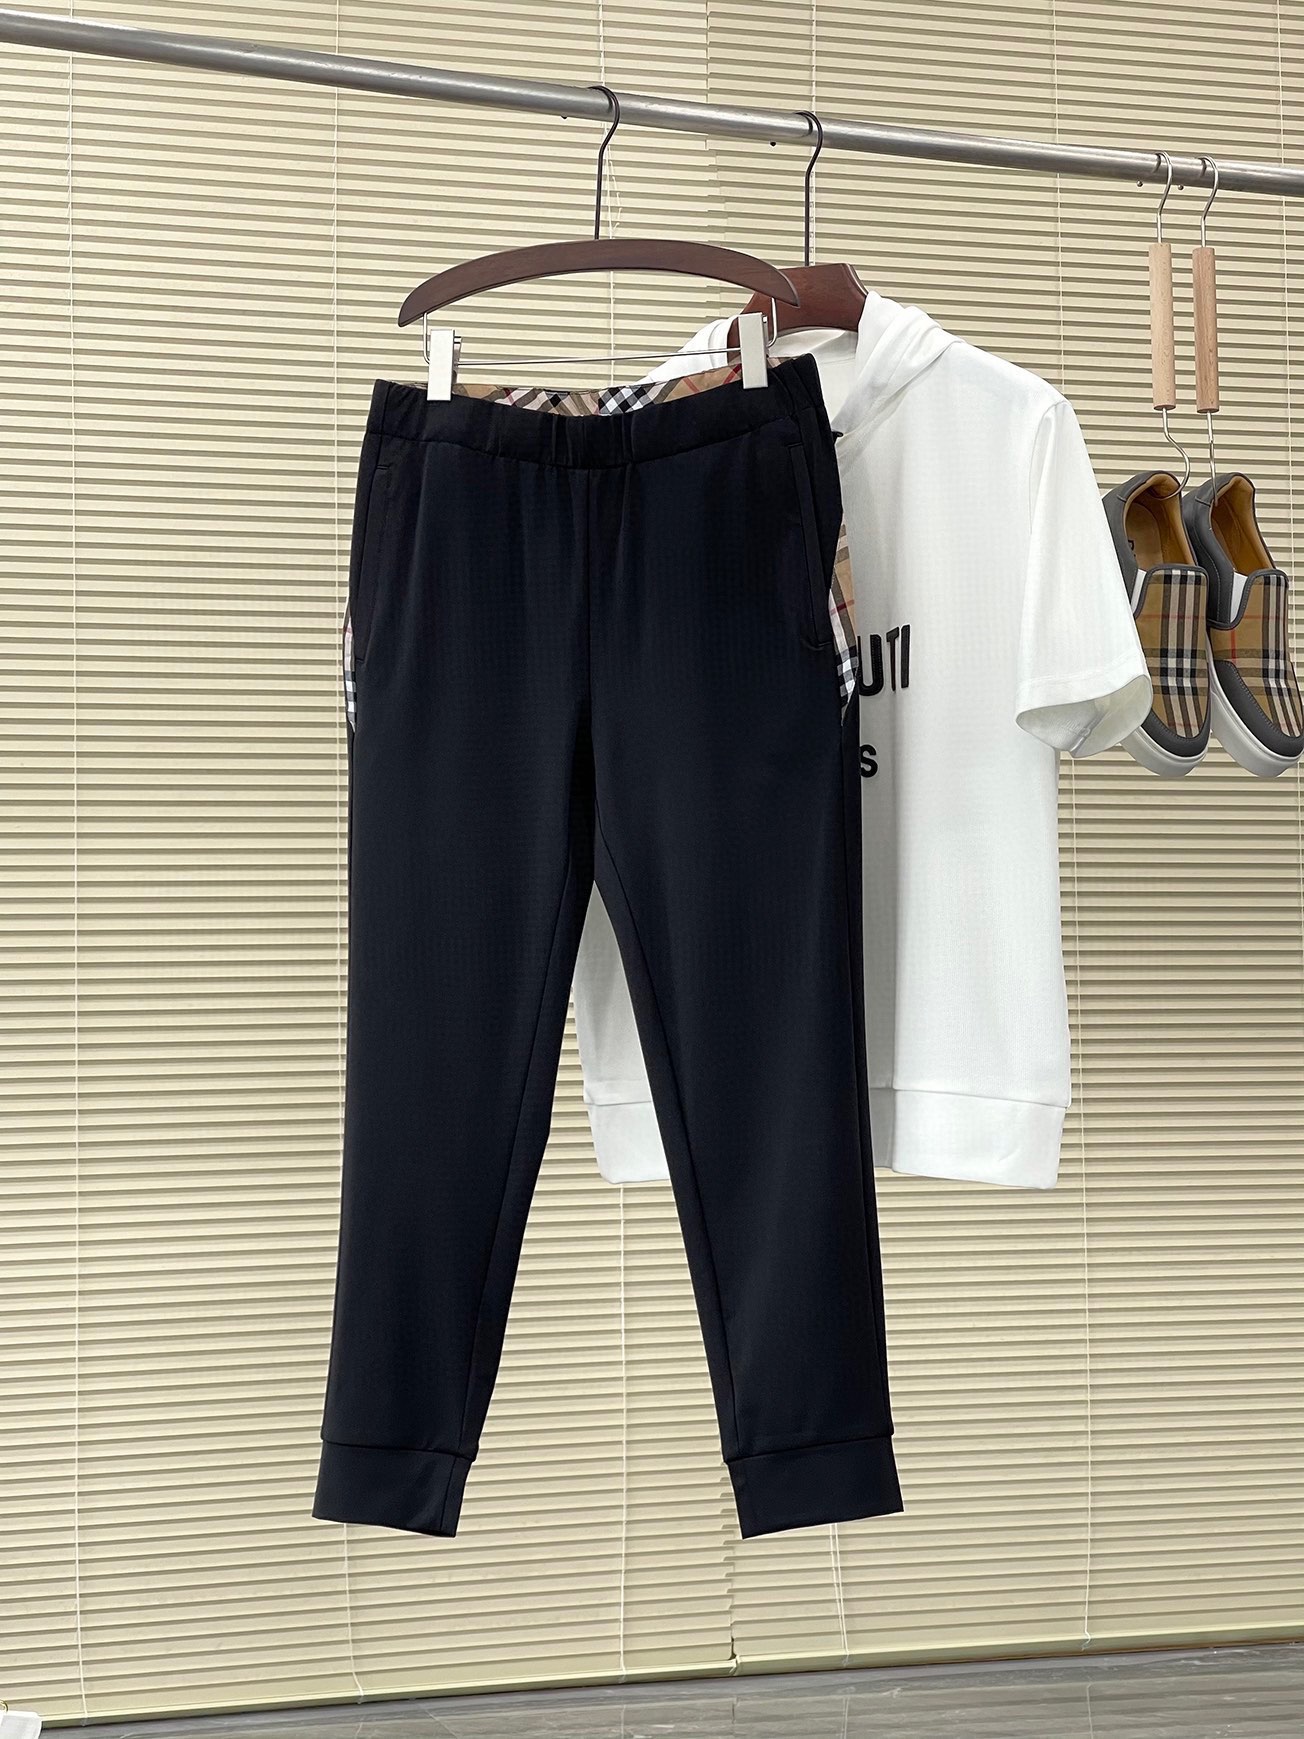 Best Replica Quality
 Clothing Pants & Trousers Black Grey Khaki Splicing Men Polyester Spandex Spring/Summer Collection Fashion Casual